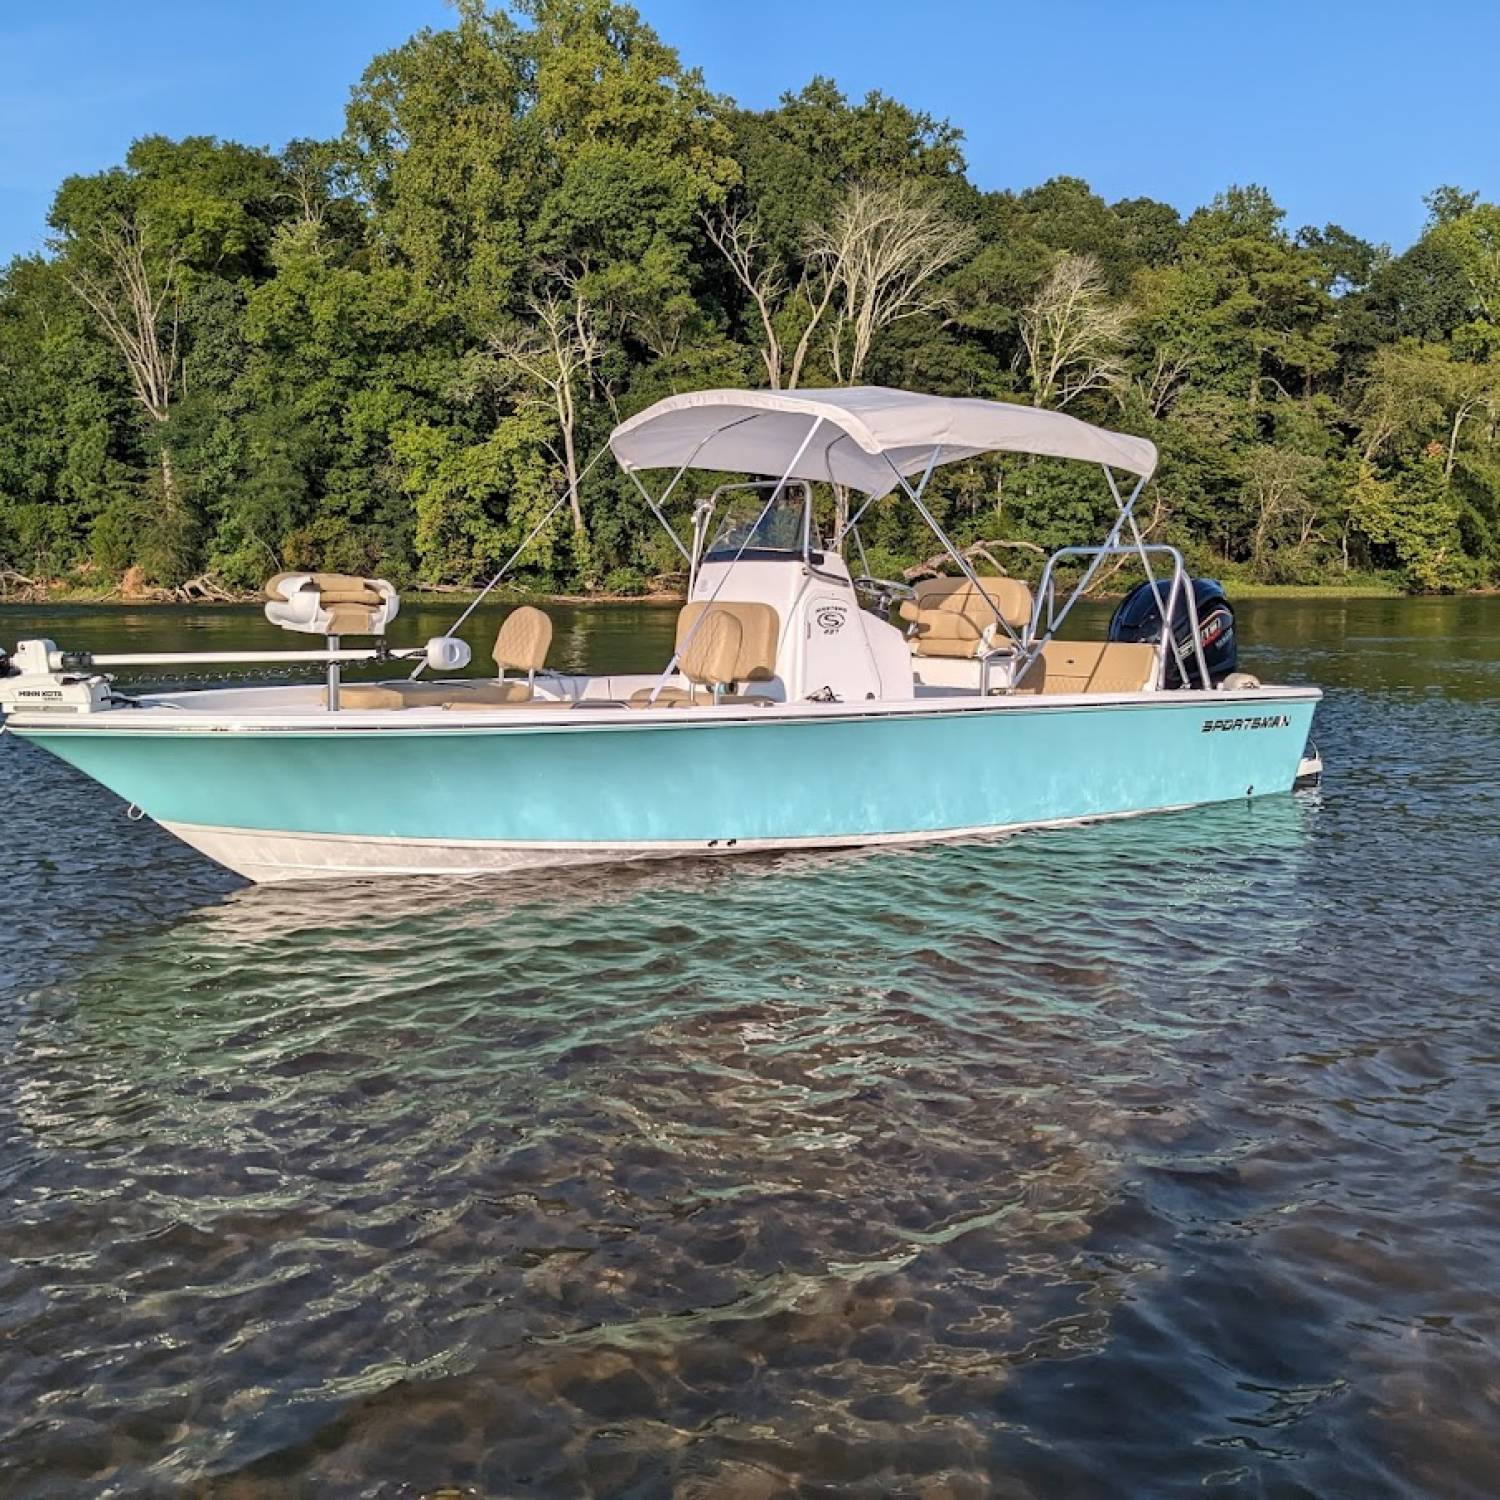 Title: Sandbar Afternoon - On board their Sportsman Masters 227 Bay Boat - Location: Mountain Island Lake. Participating in the Photo Contest #SportsmanMarch2023